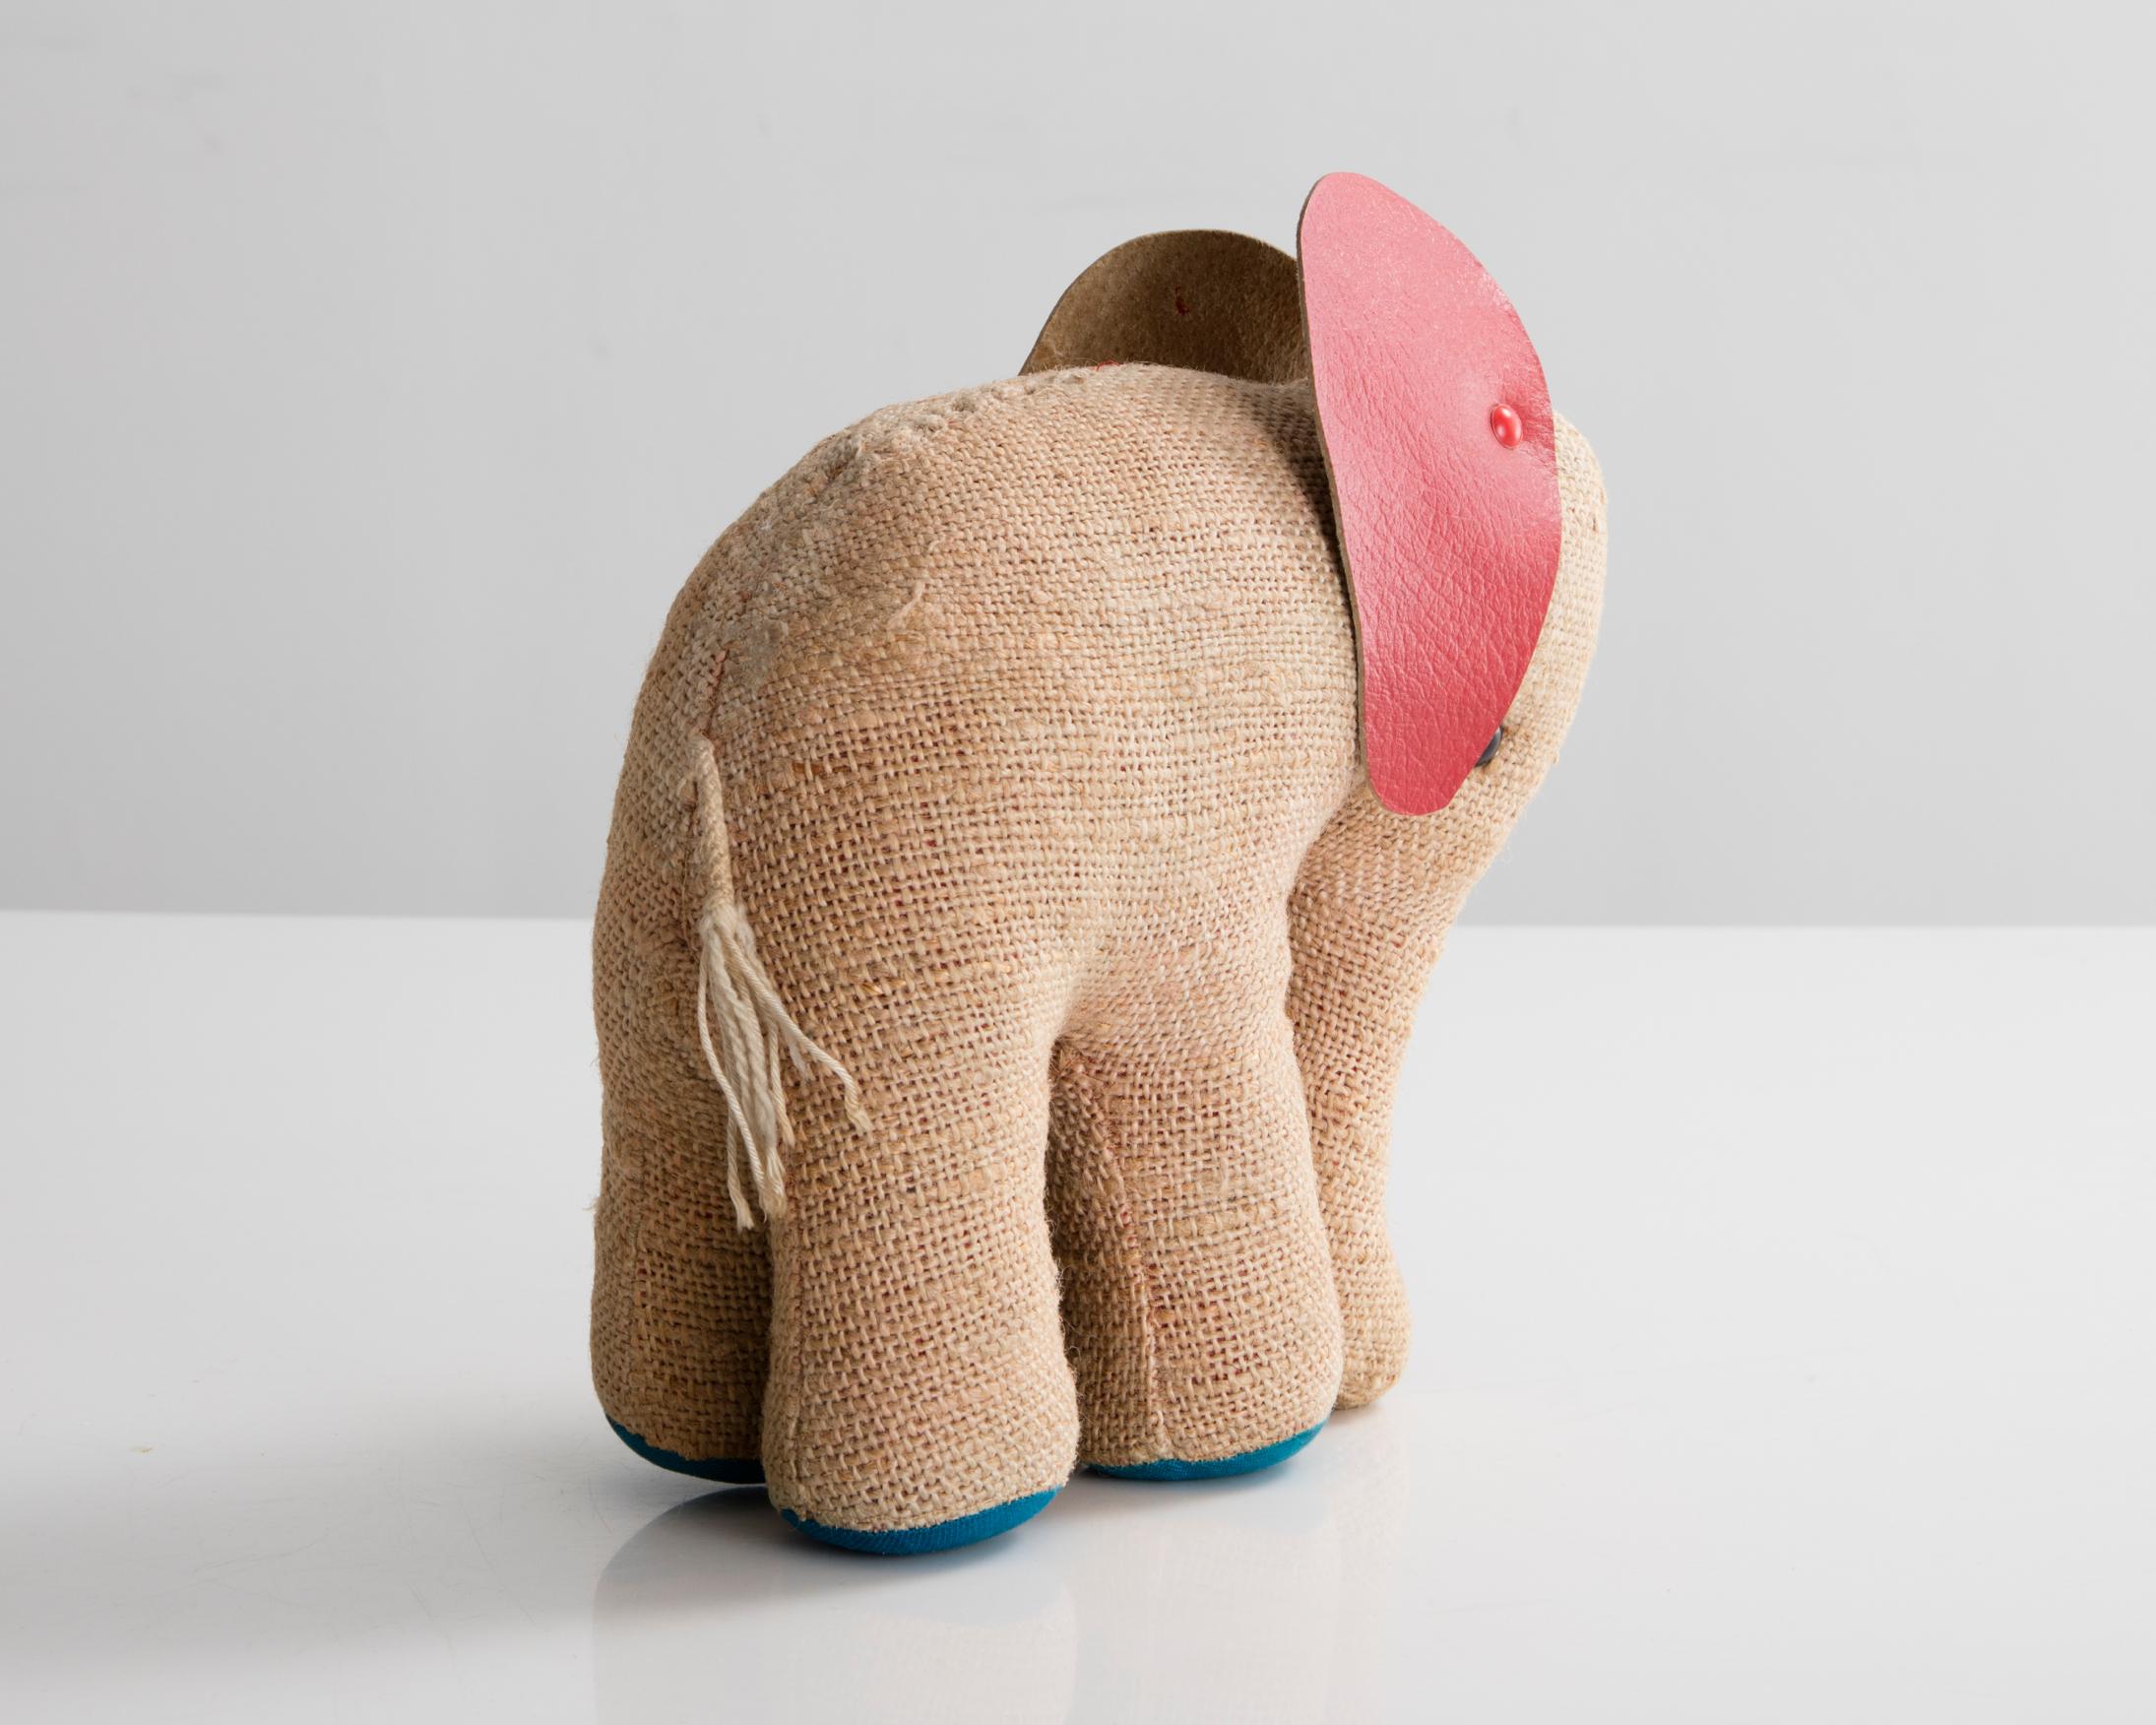 Therapeutic toy small elephant in jute and leather. Originally designed and made by Renate Müller for H. Josef Leven, Sonneberg, Germany, circa 1969.
 